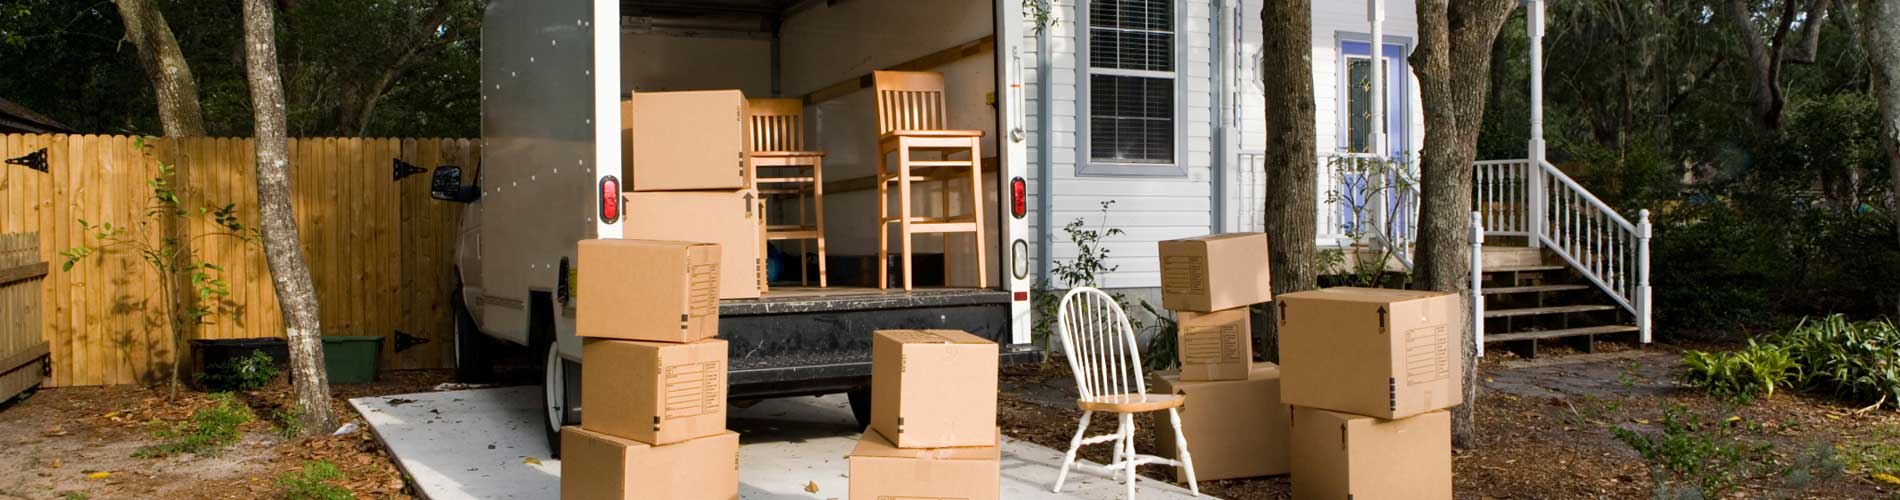 Complete furniture set-up and unpacking services